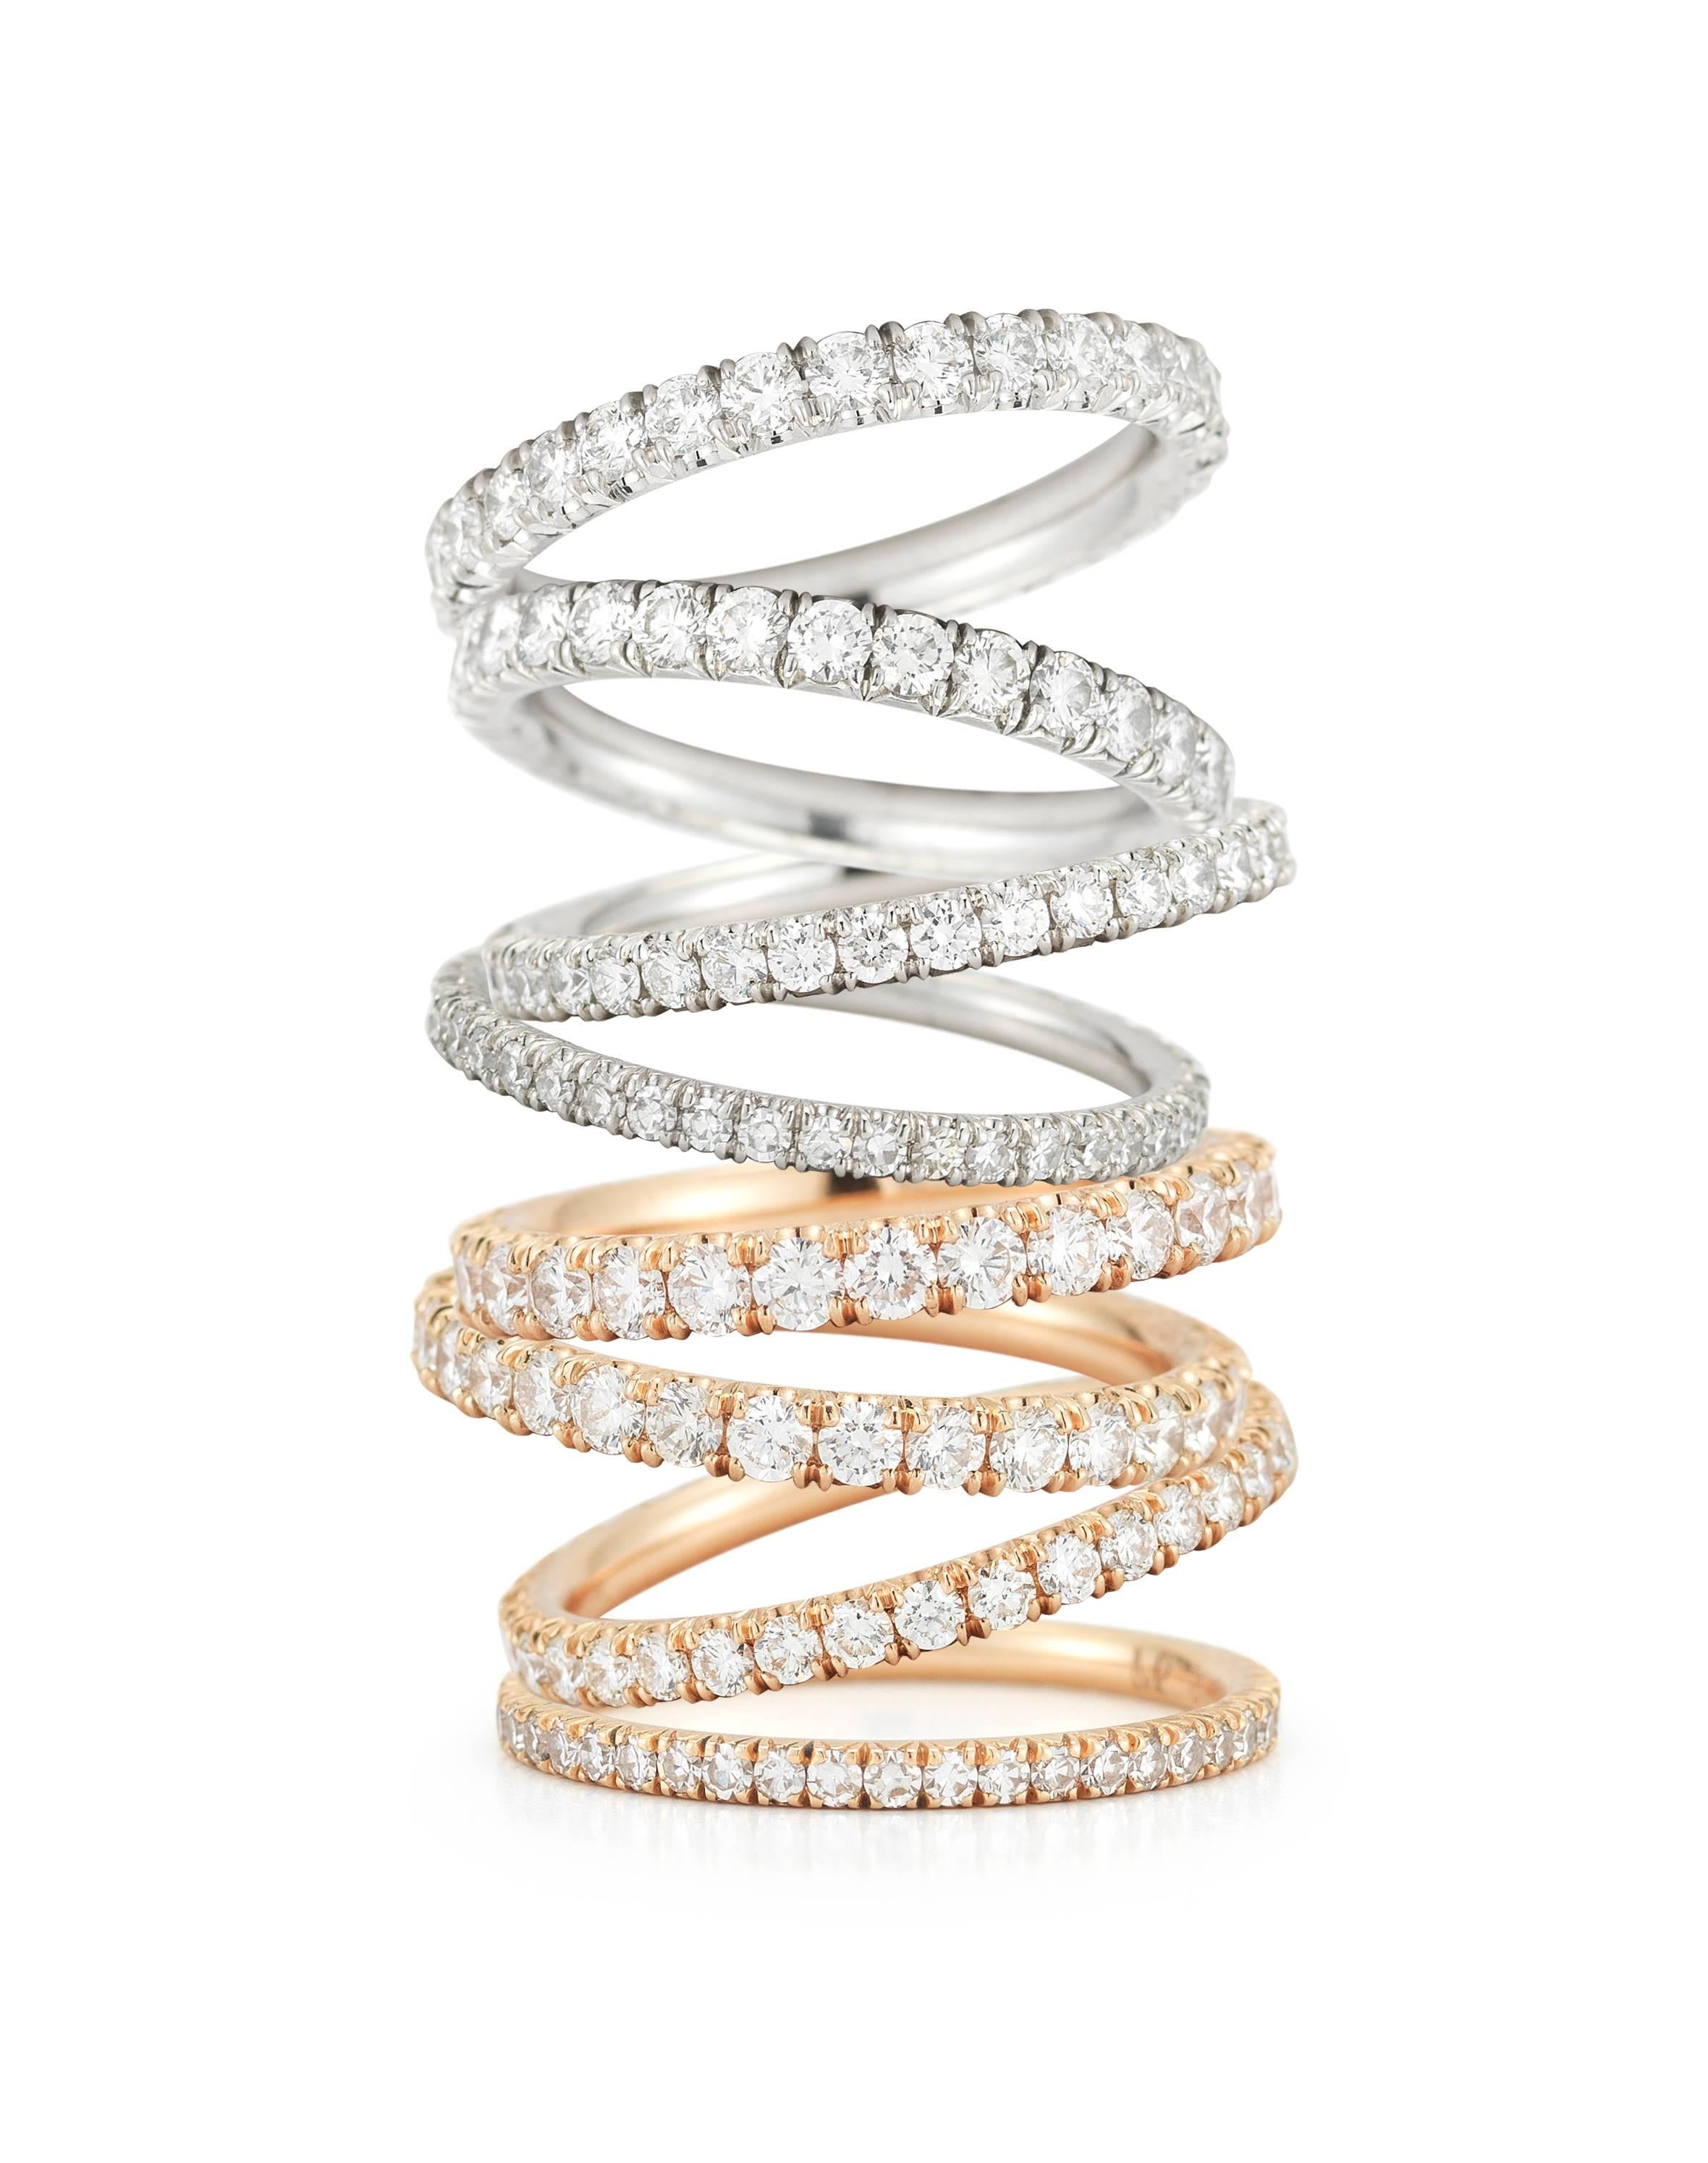 The diamond eternity band makes an ideal wedding band. The perfect ring made with expert craftsmanship is sleek and streamlined from every point of view. Each four point diamond is carefully set into a solid metal ring by a master stone setter,